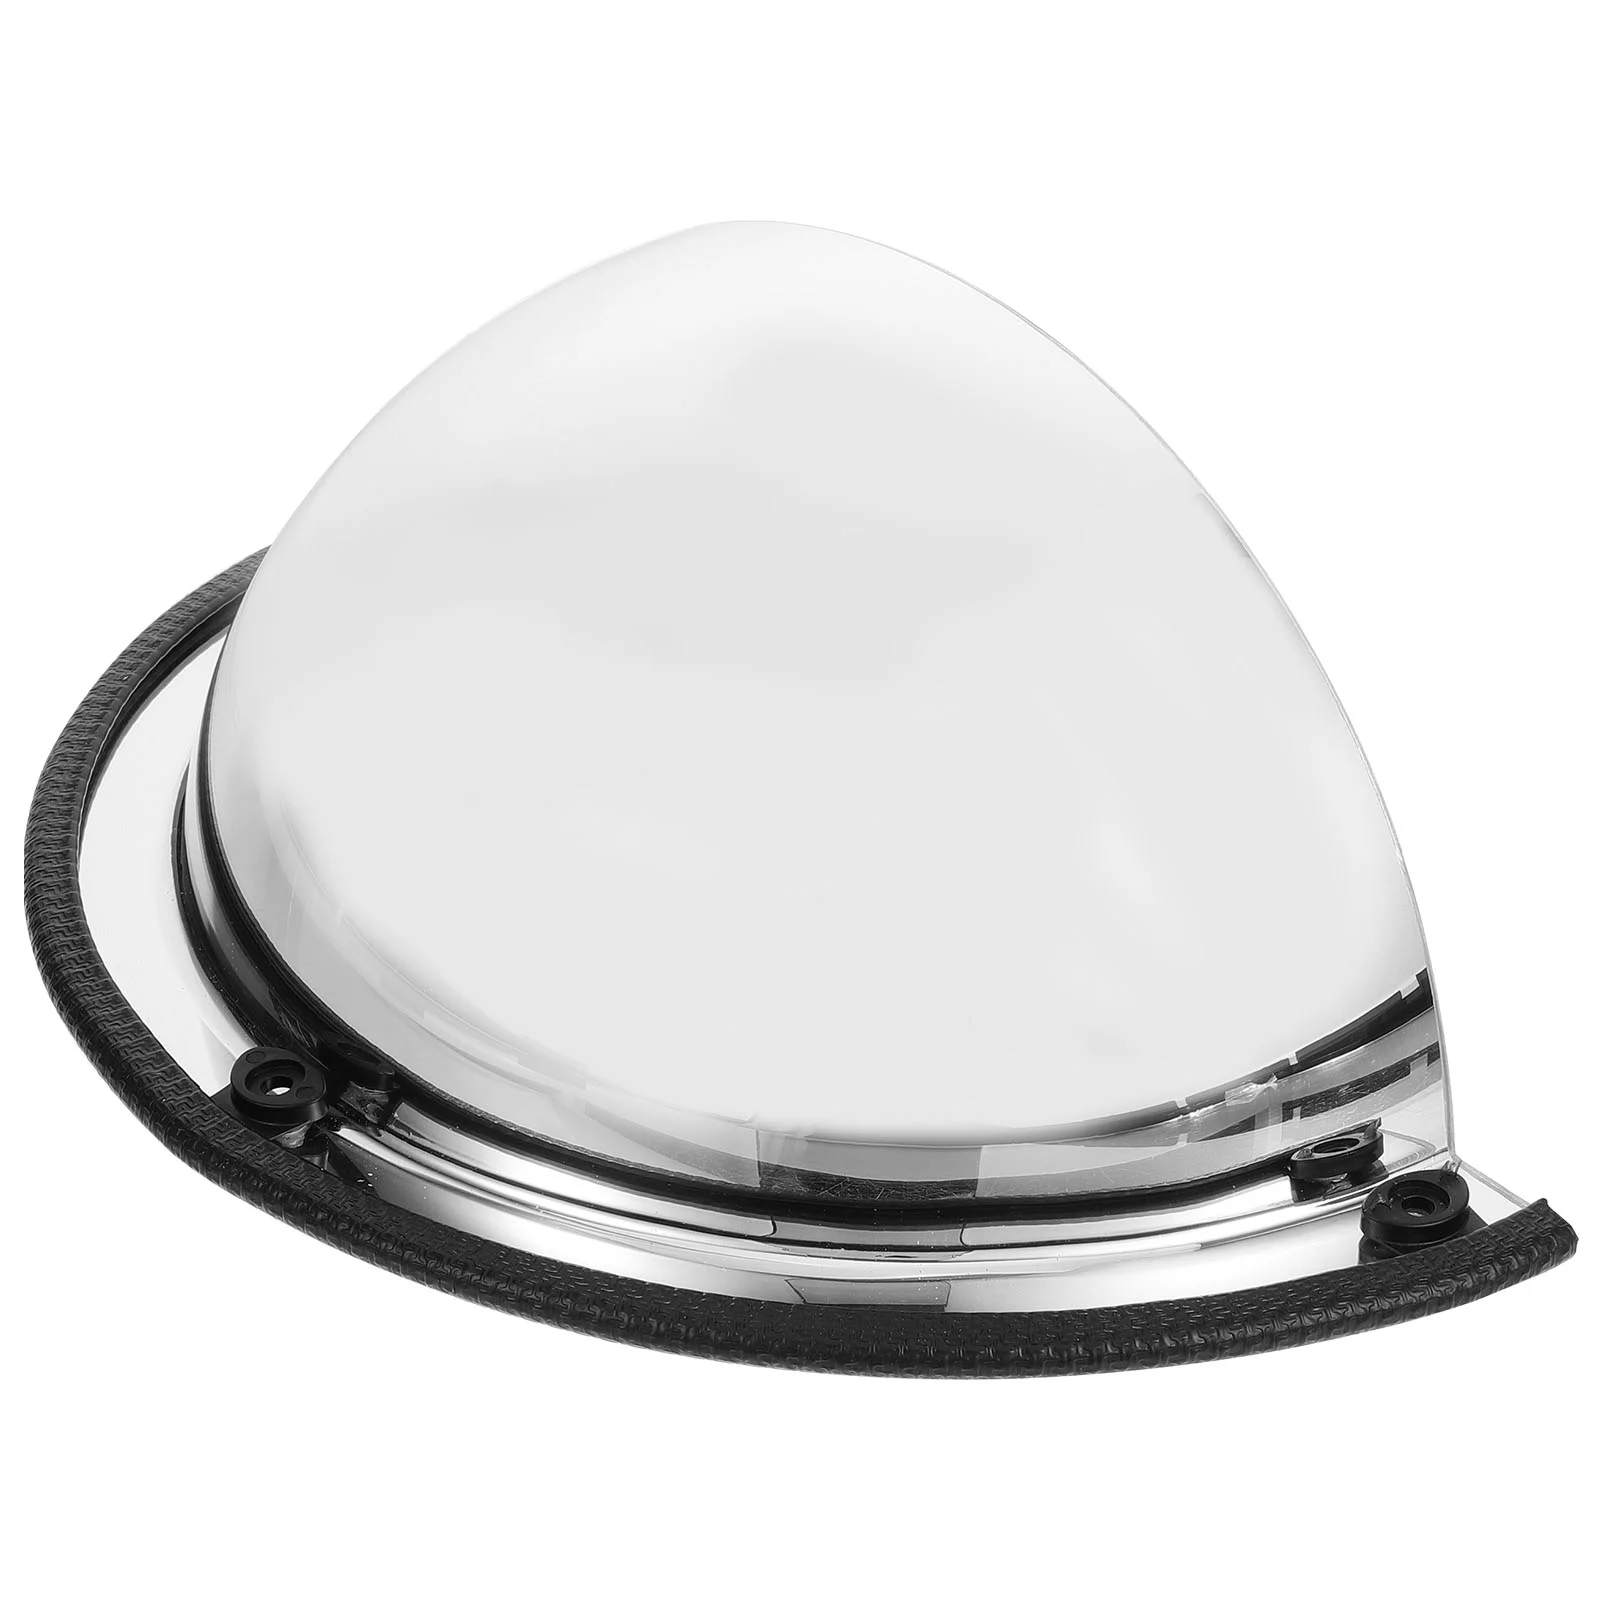 convex-anti-mirror-road-garage-convex-outdoor-traffic-wide-angle-lens-corner-for-wall-safety-convex-anti-mirrors